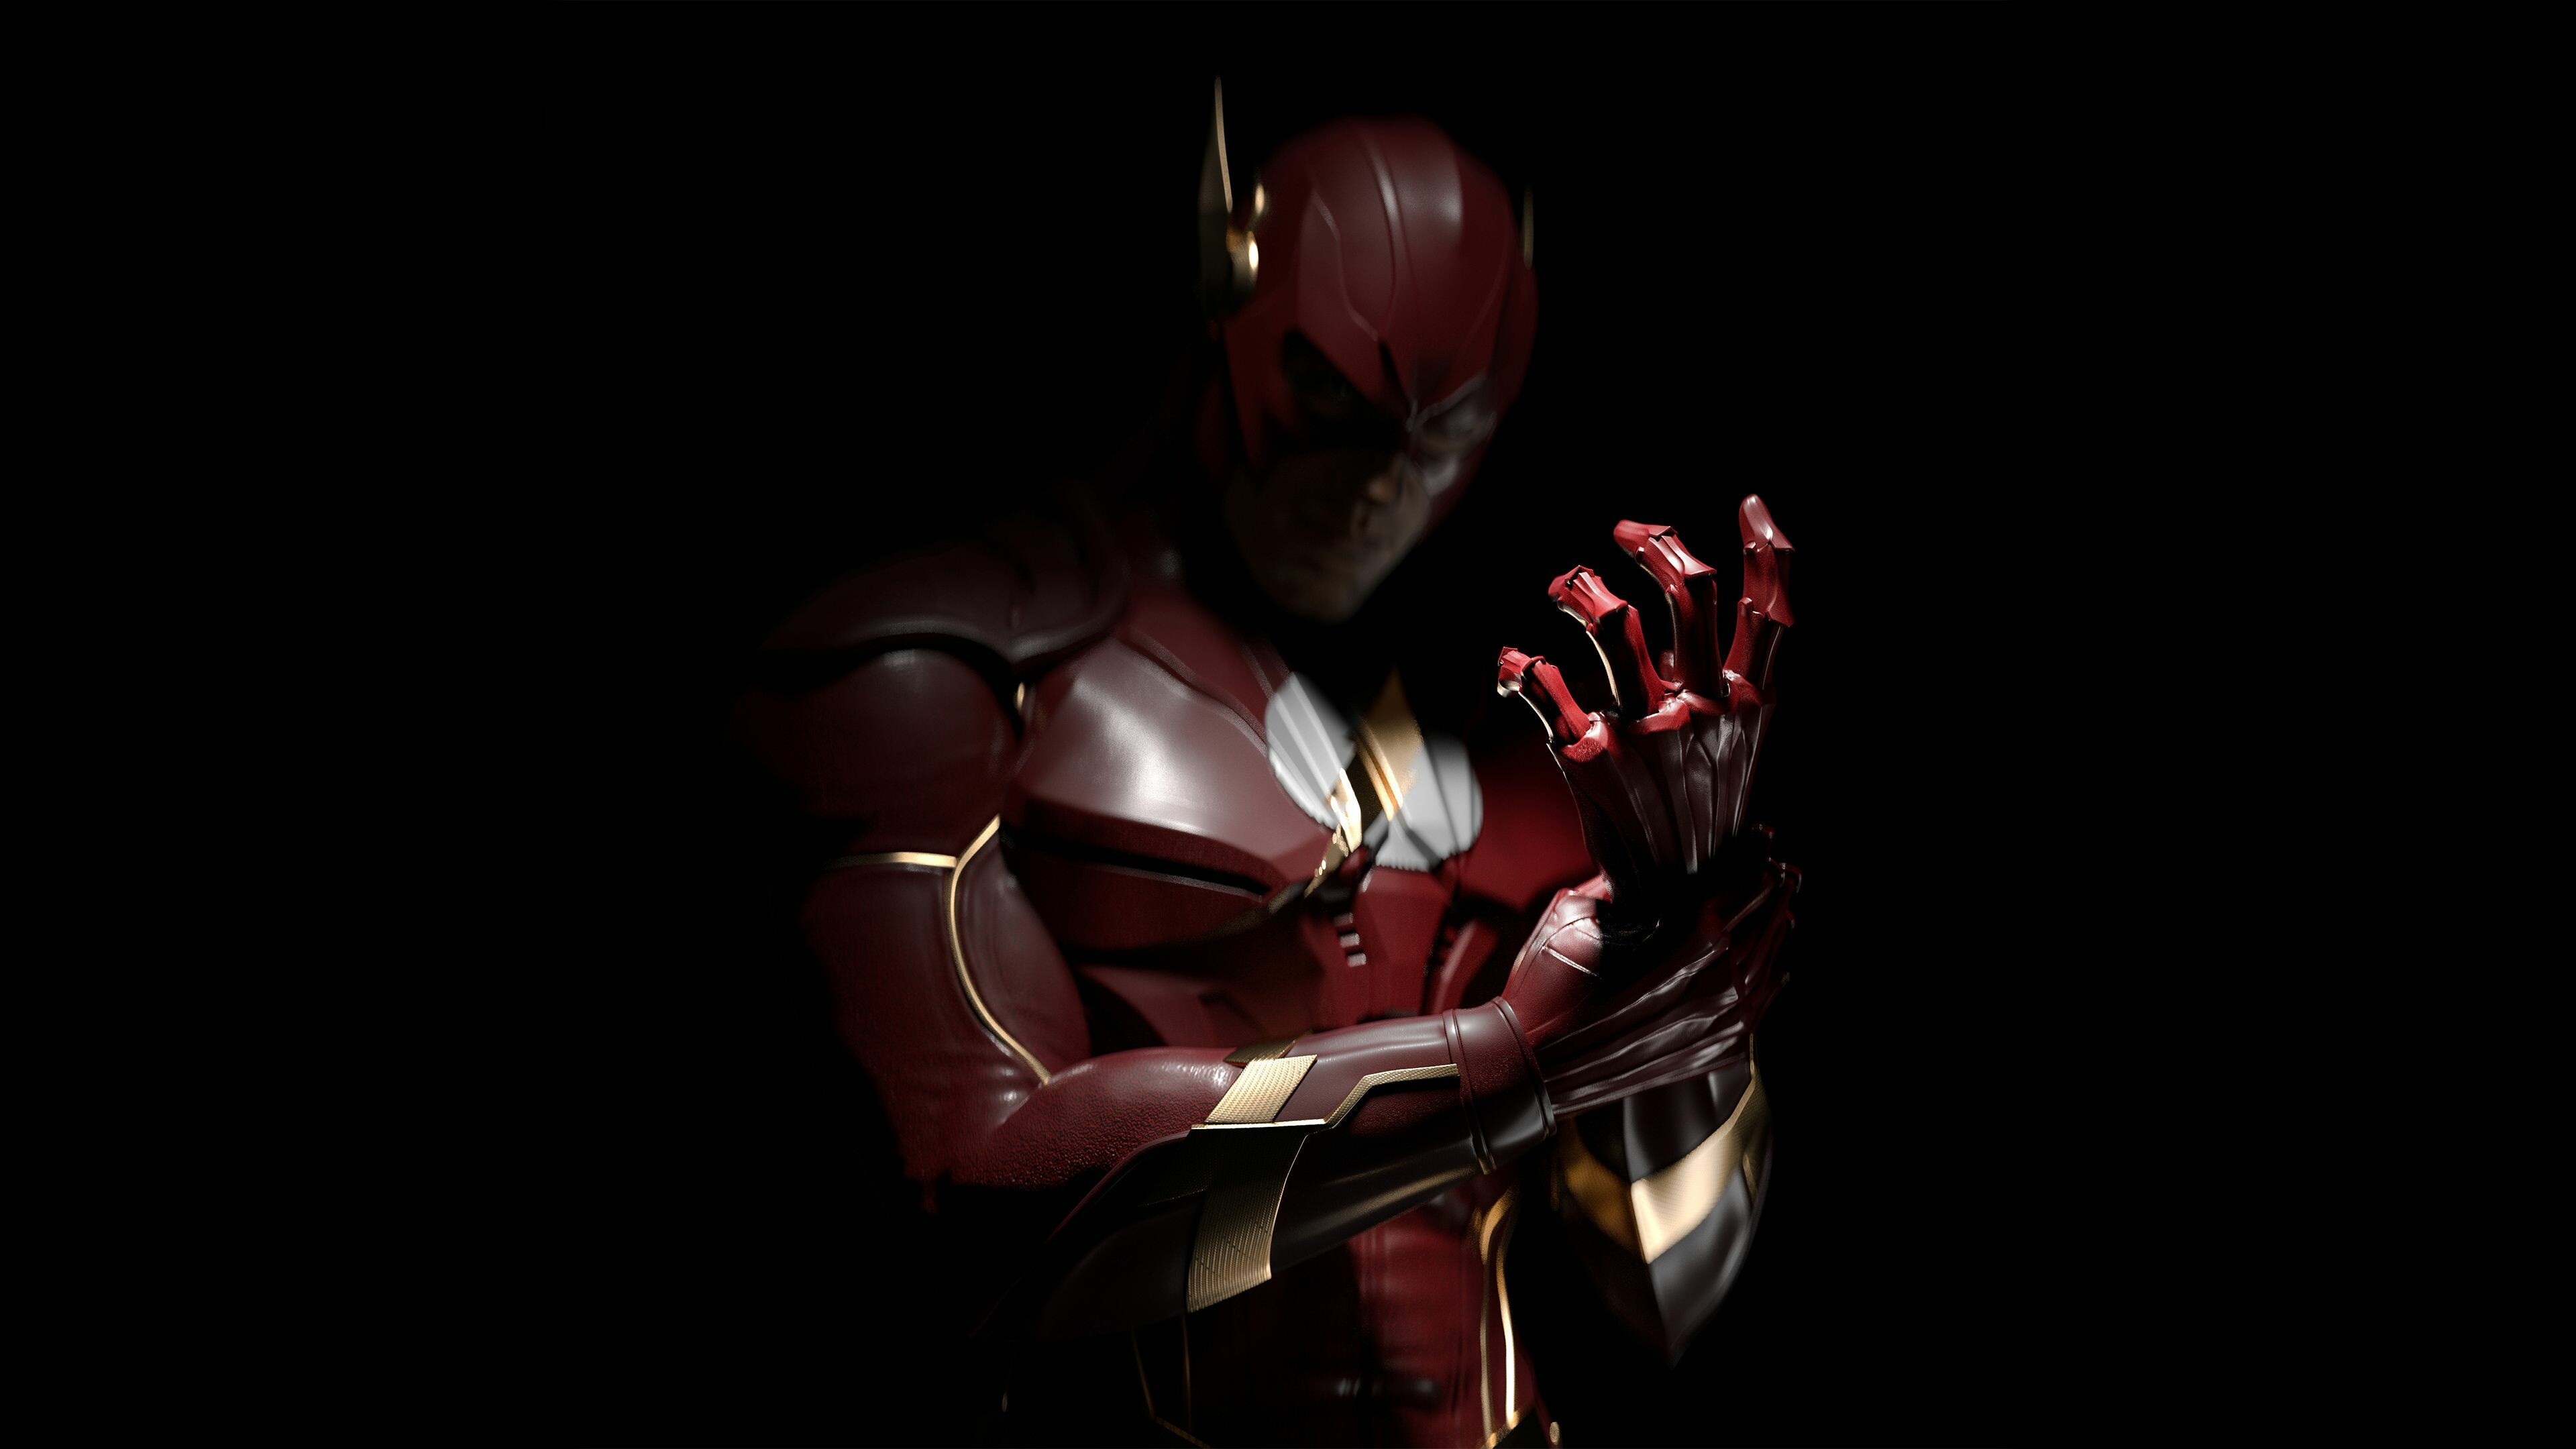 Injustice: Flash, The scarlet speedster, The fastest game character. 3840x2160 4K Wallpaper.